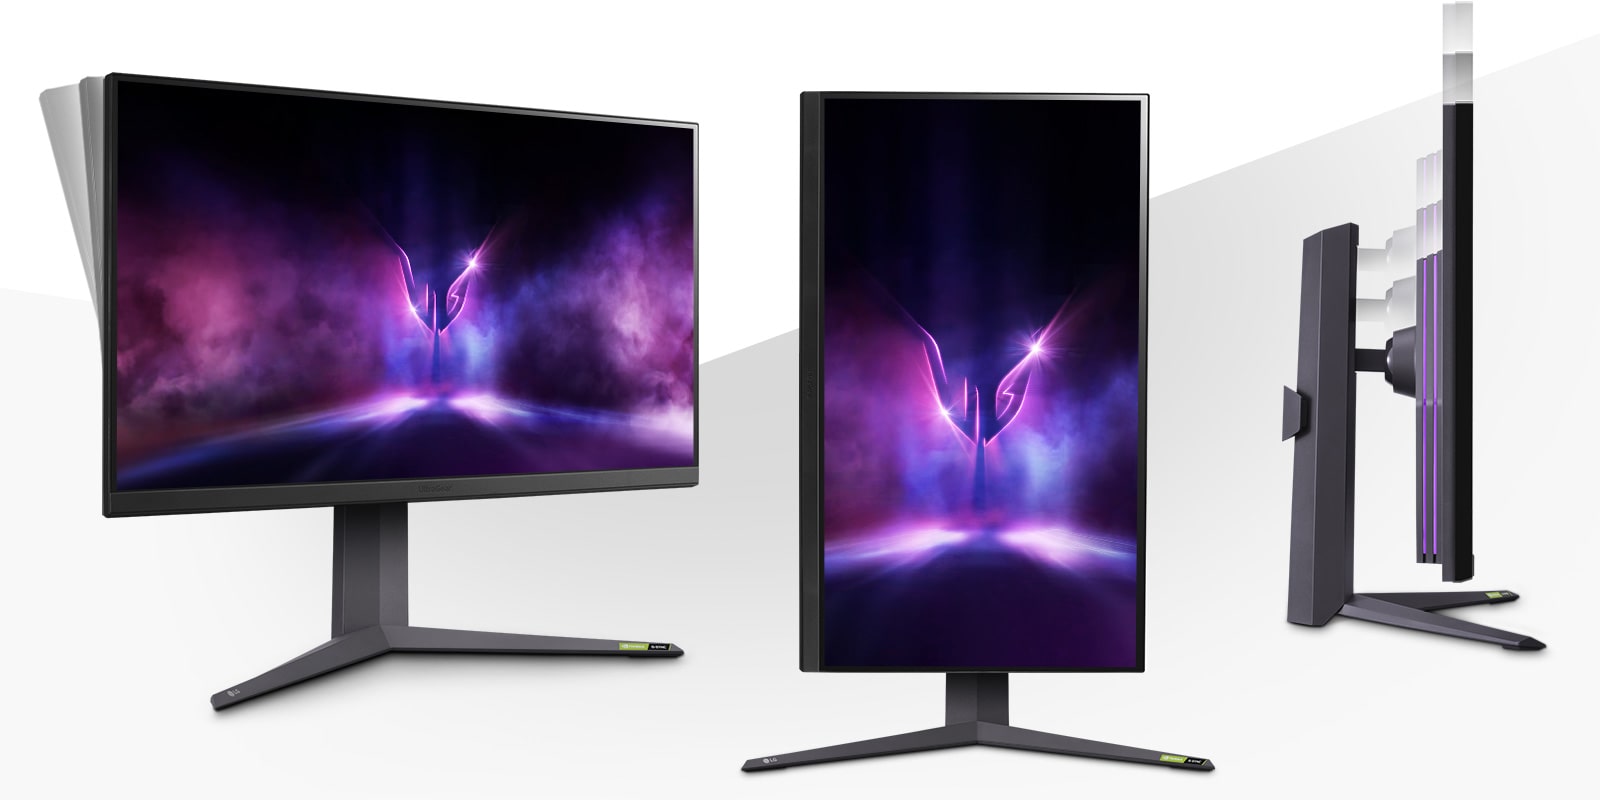 The image shows three modes of the three-sided narrow bezel monitor, allowing esports players to tilt, height adjust and pivot to play games comfortably.